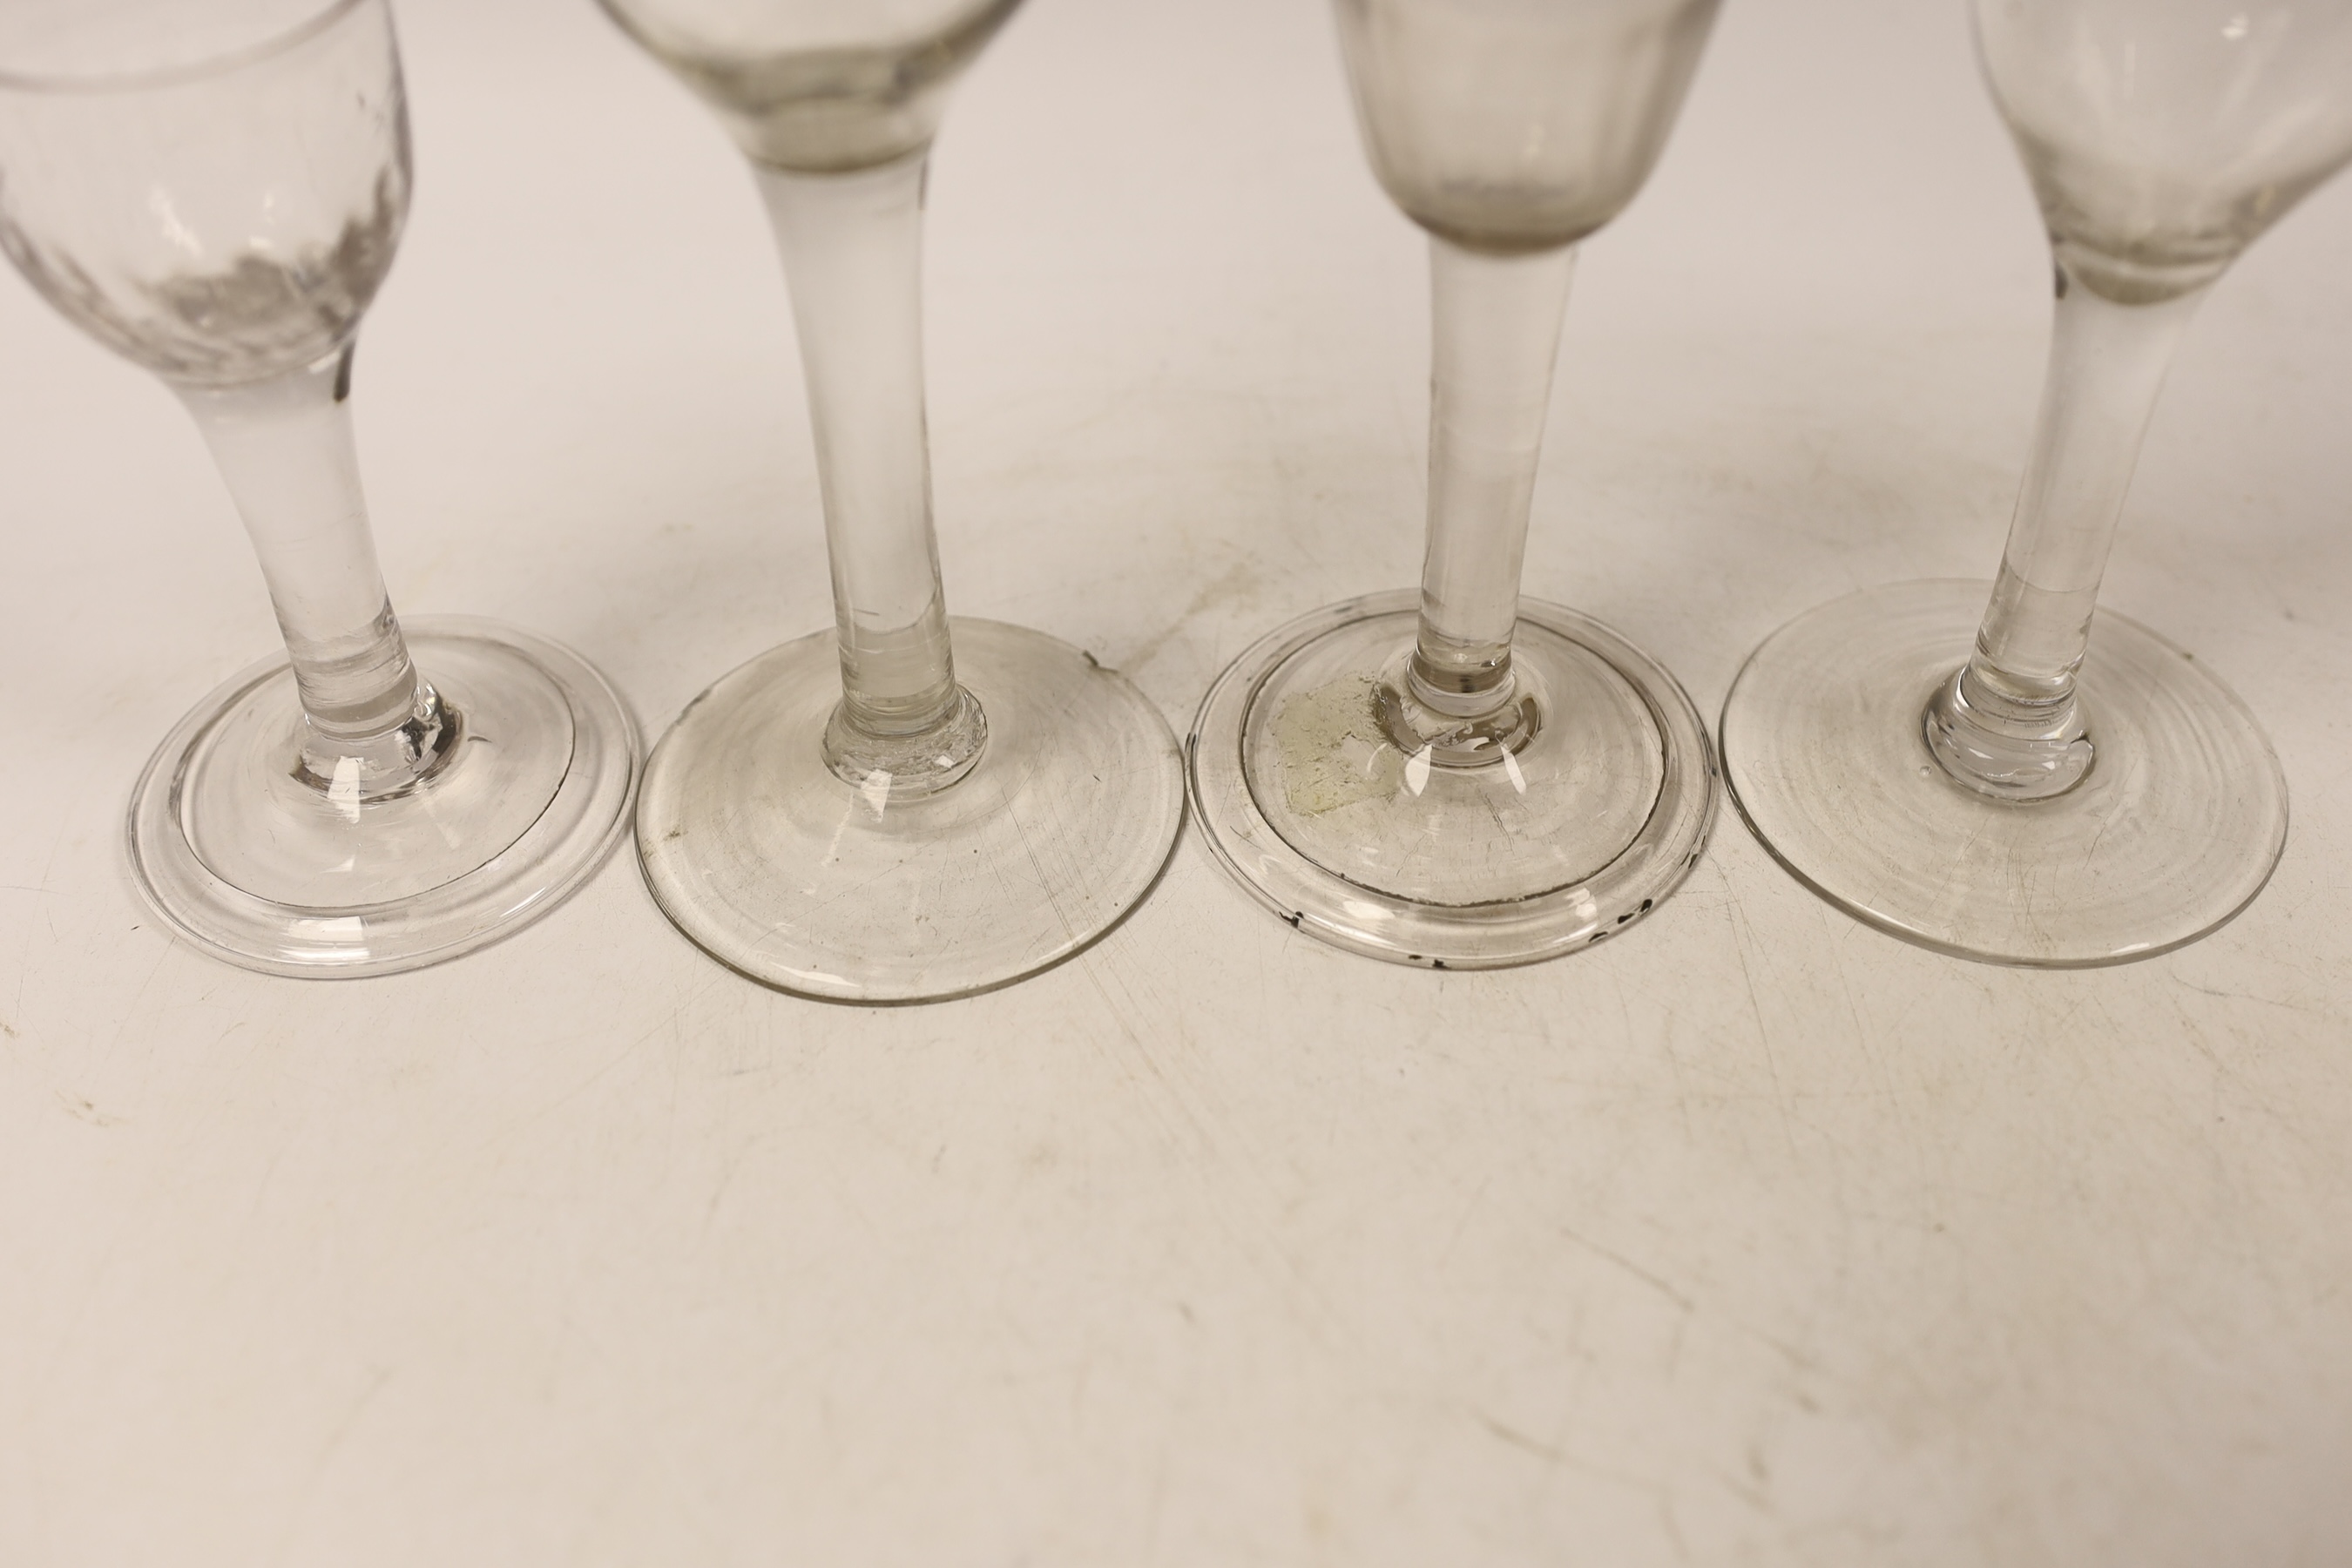 Four plain stem wine and cordial glasses, first half 18th century, two examples with folded feet, tallest 16.5cm